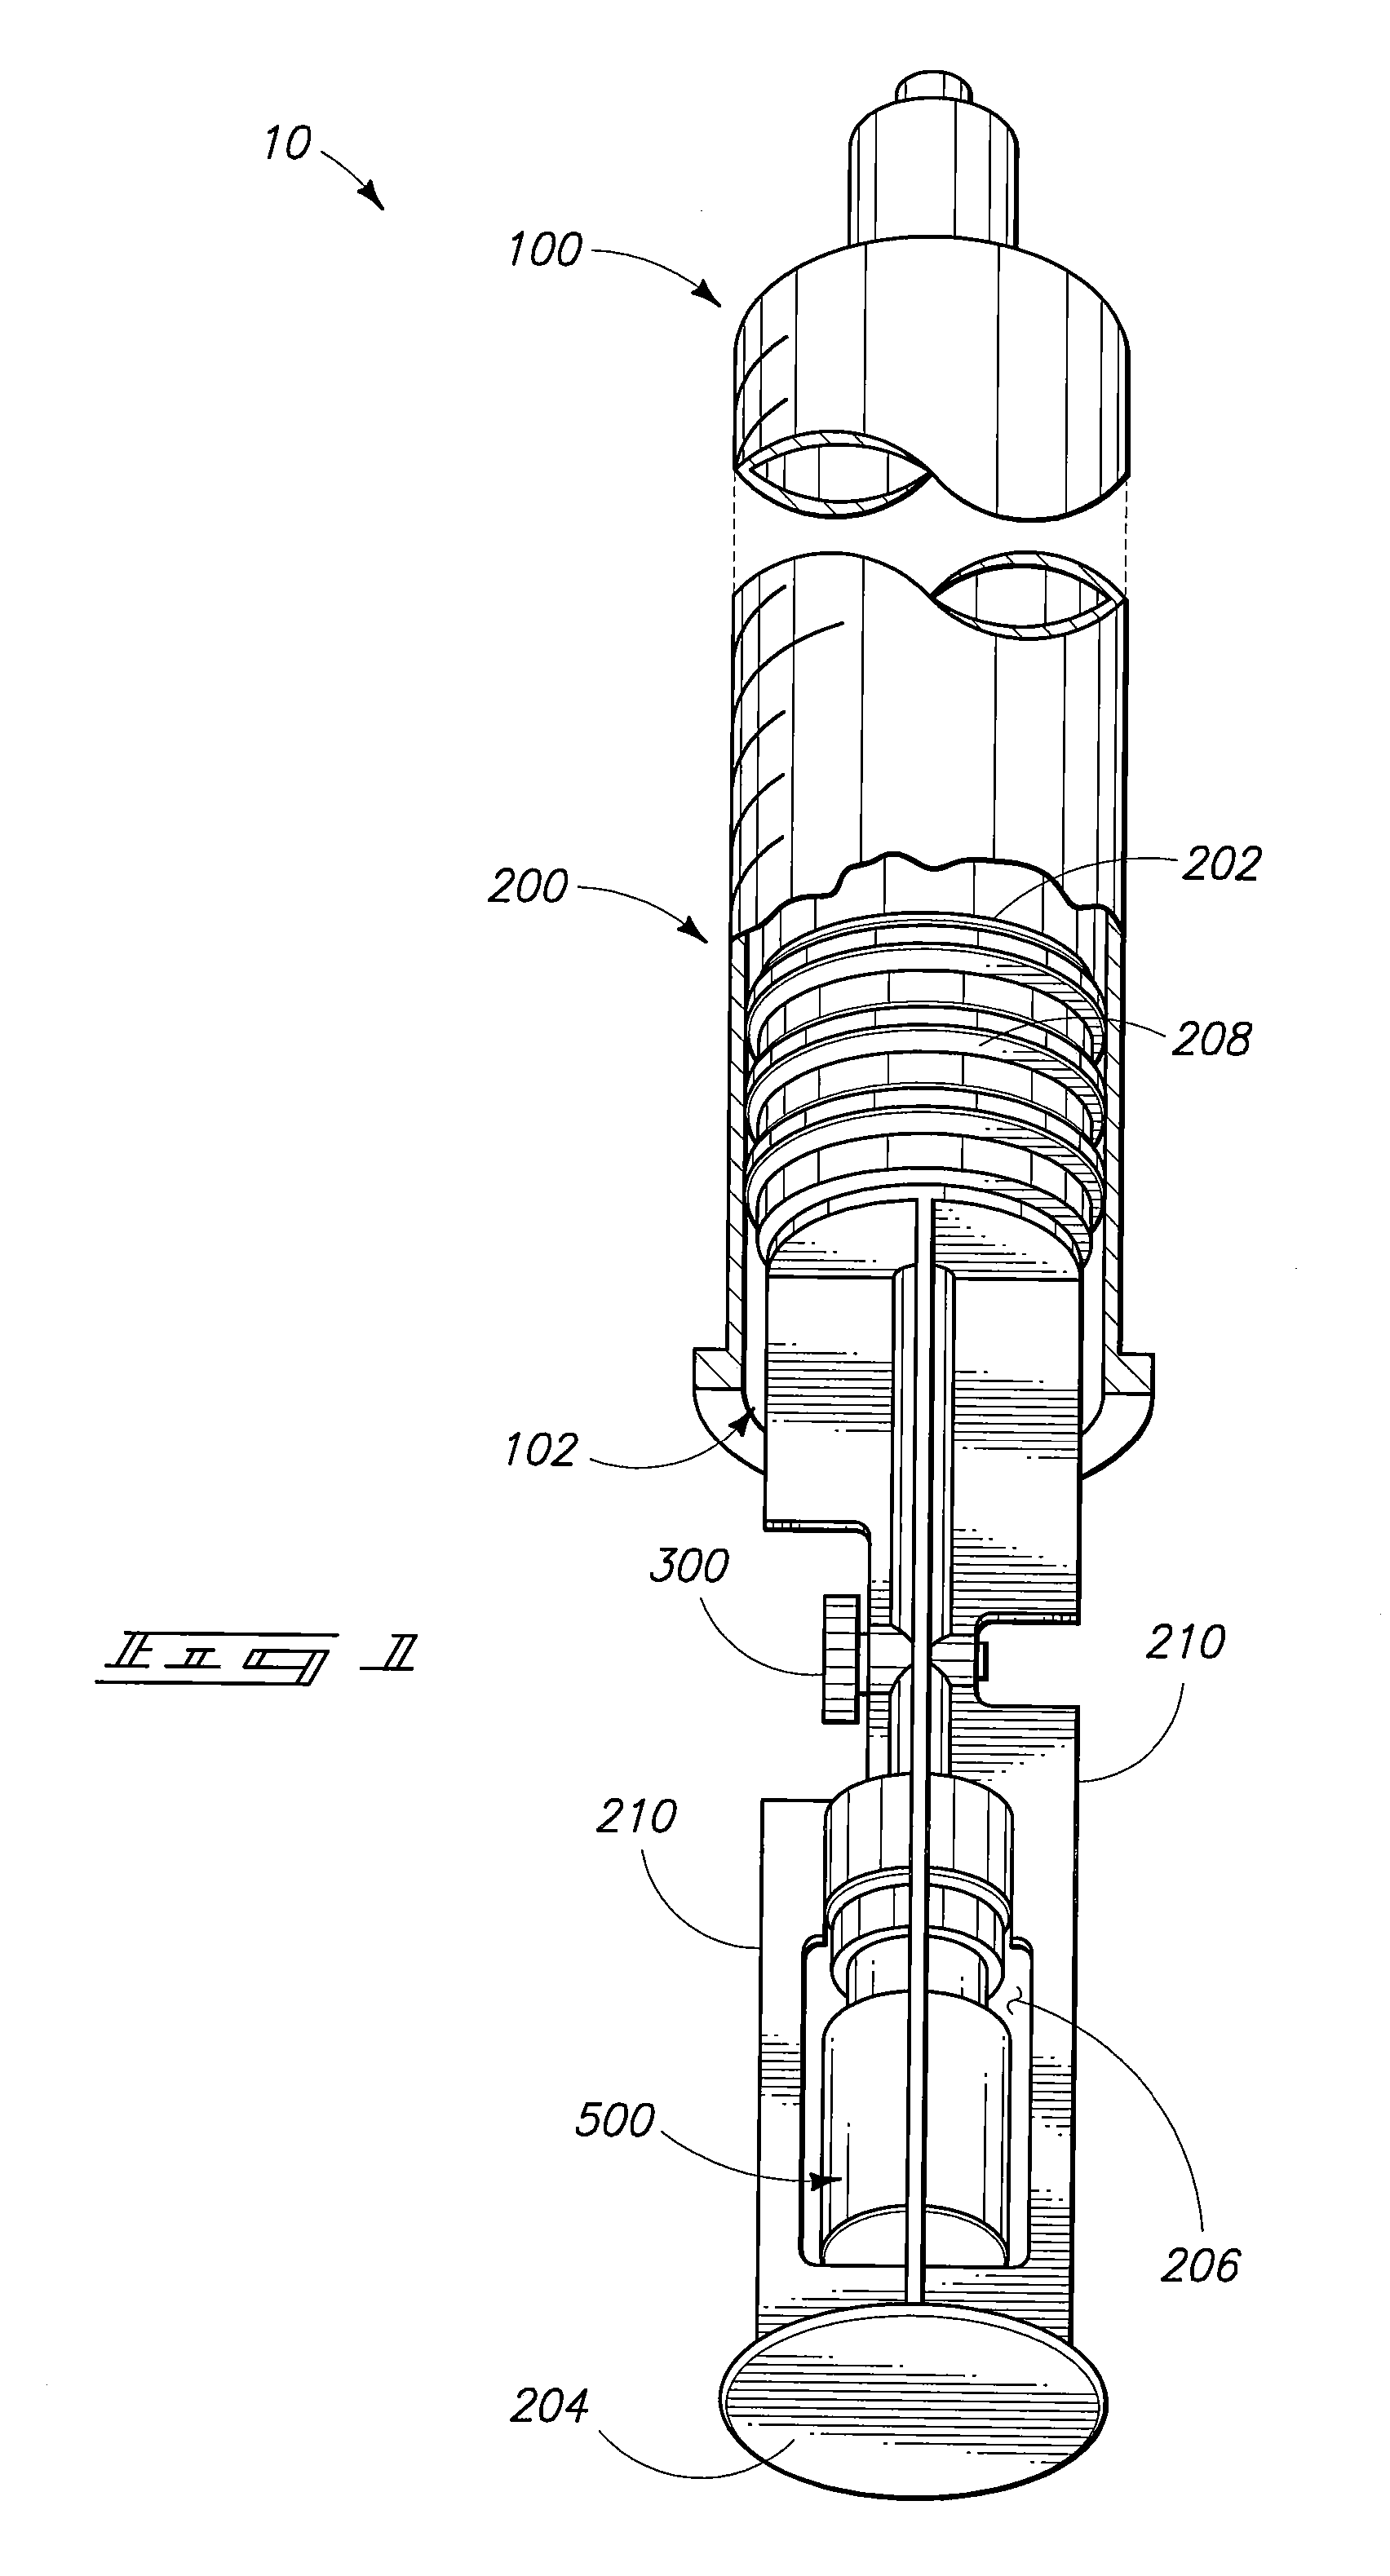 Syringe Devices, Components of Syringe Devices, and Methods of Forming Components and Syringe Devices